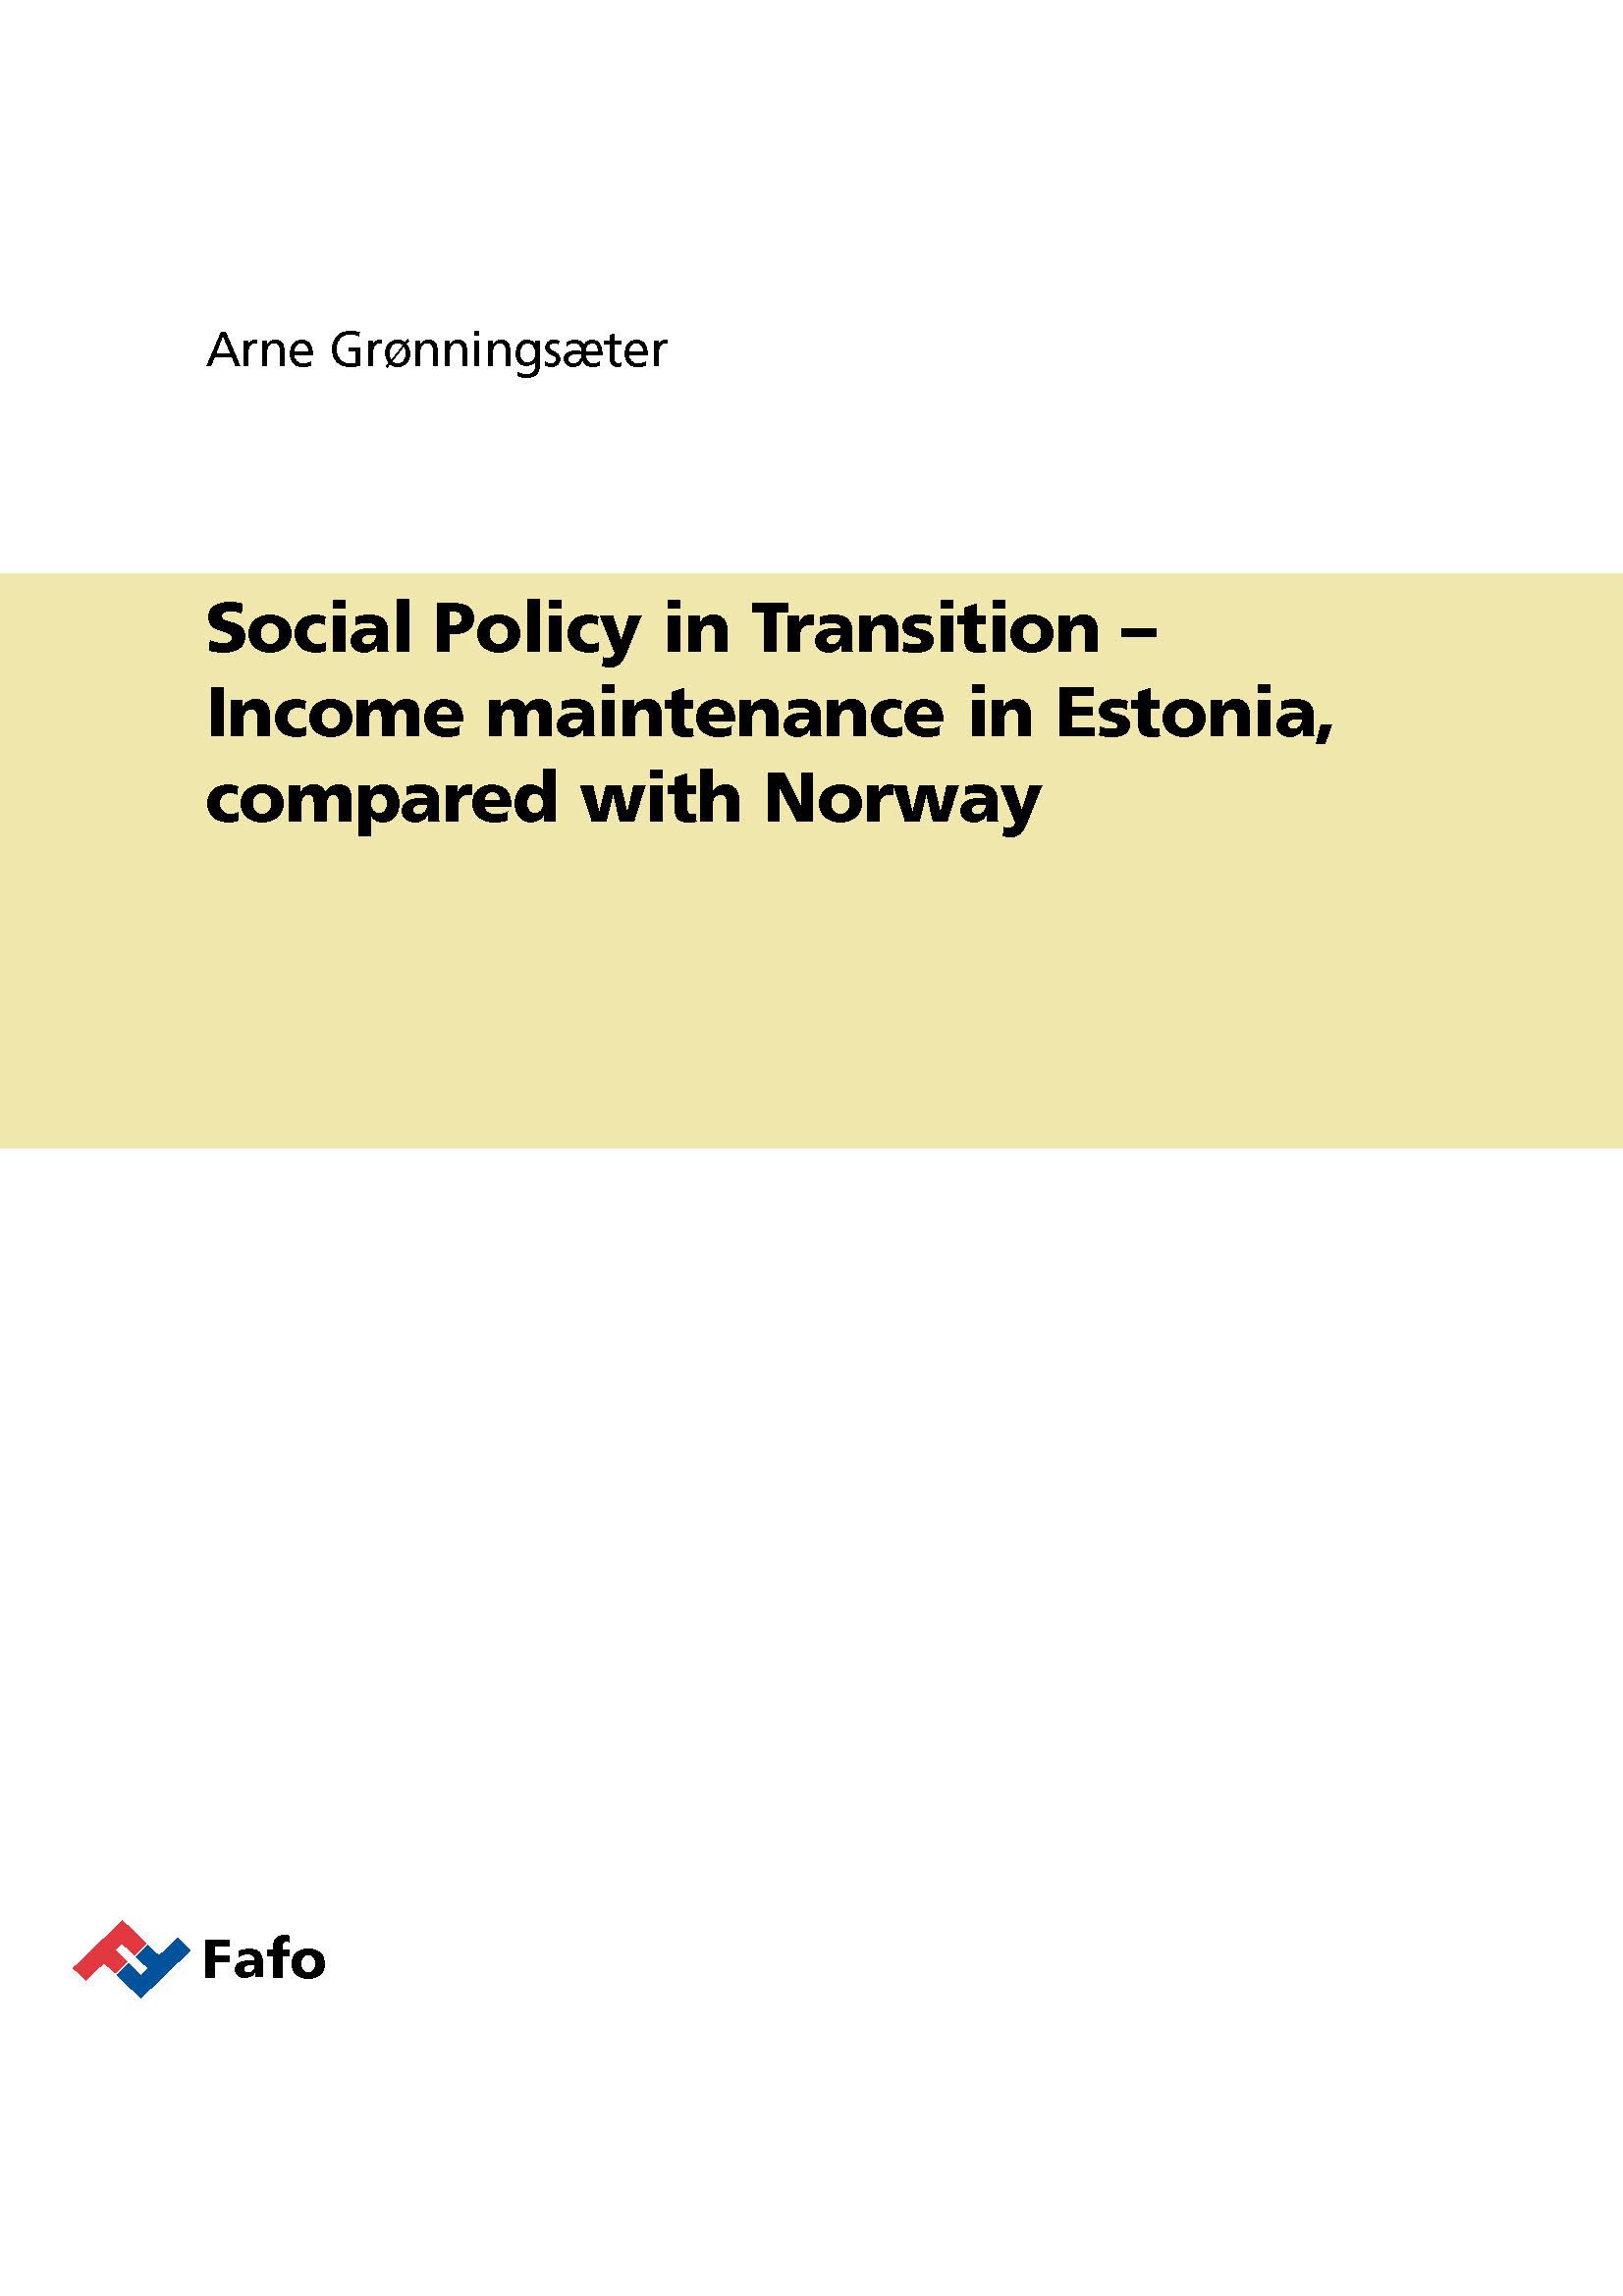 Social Policy in Transition – Income maintenance in Estonia, compared with Norway